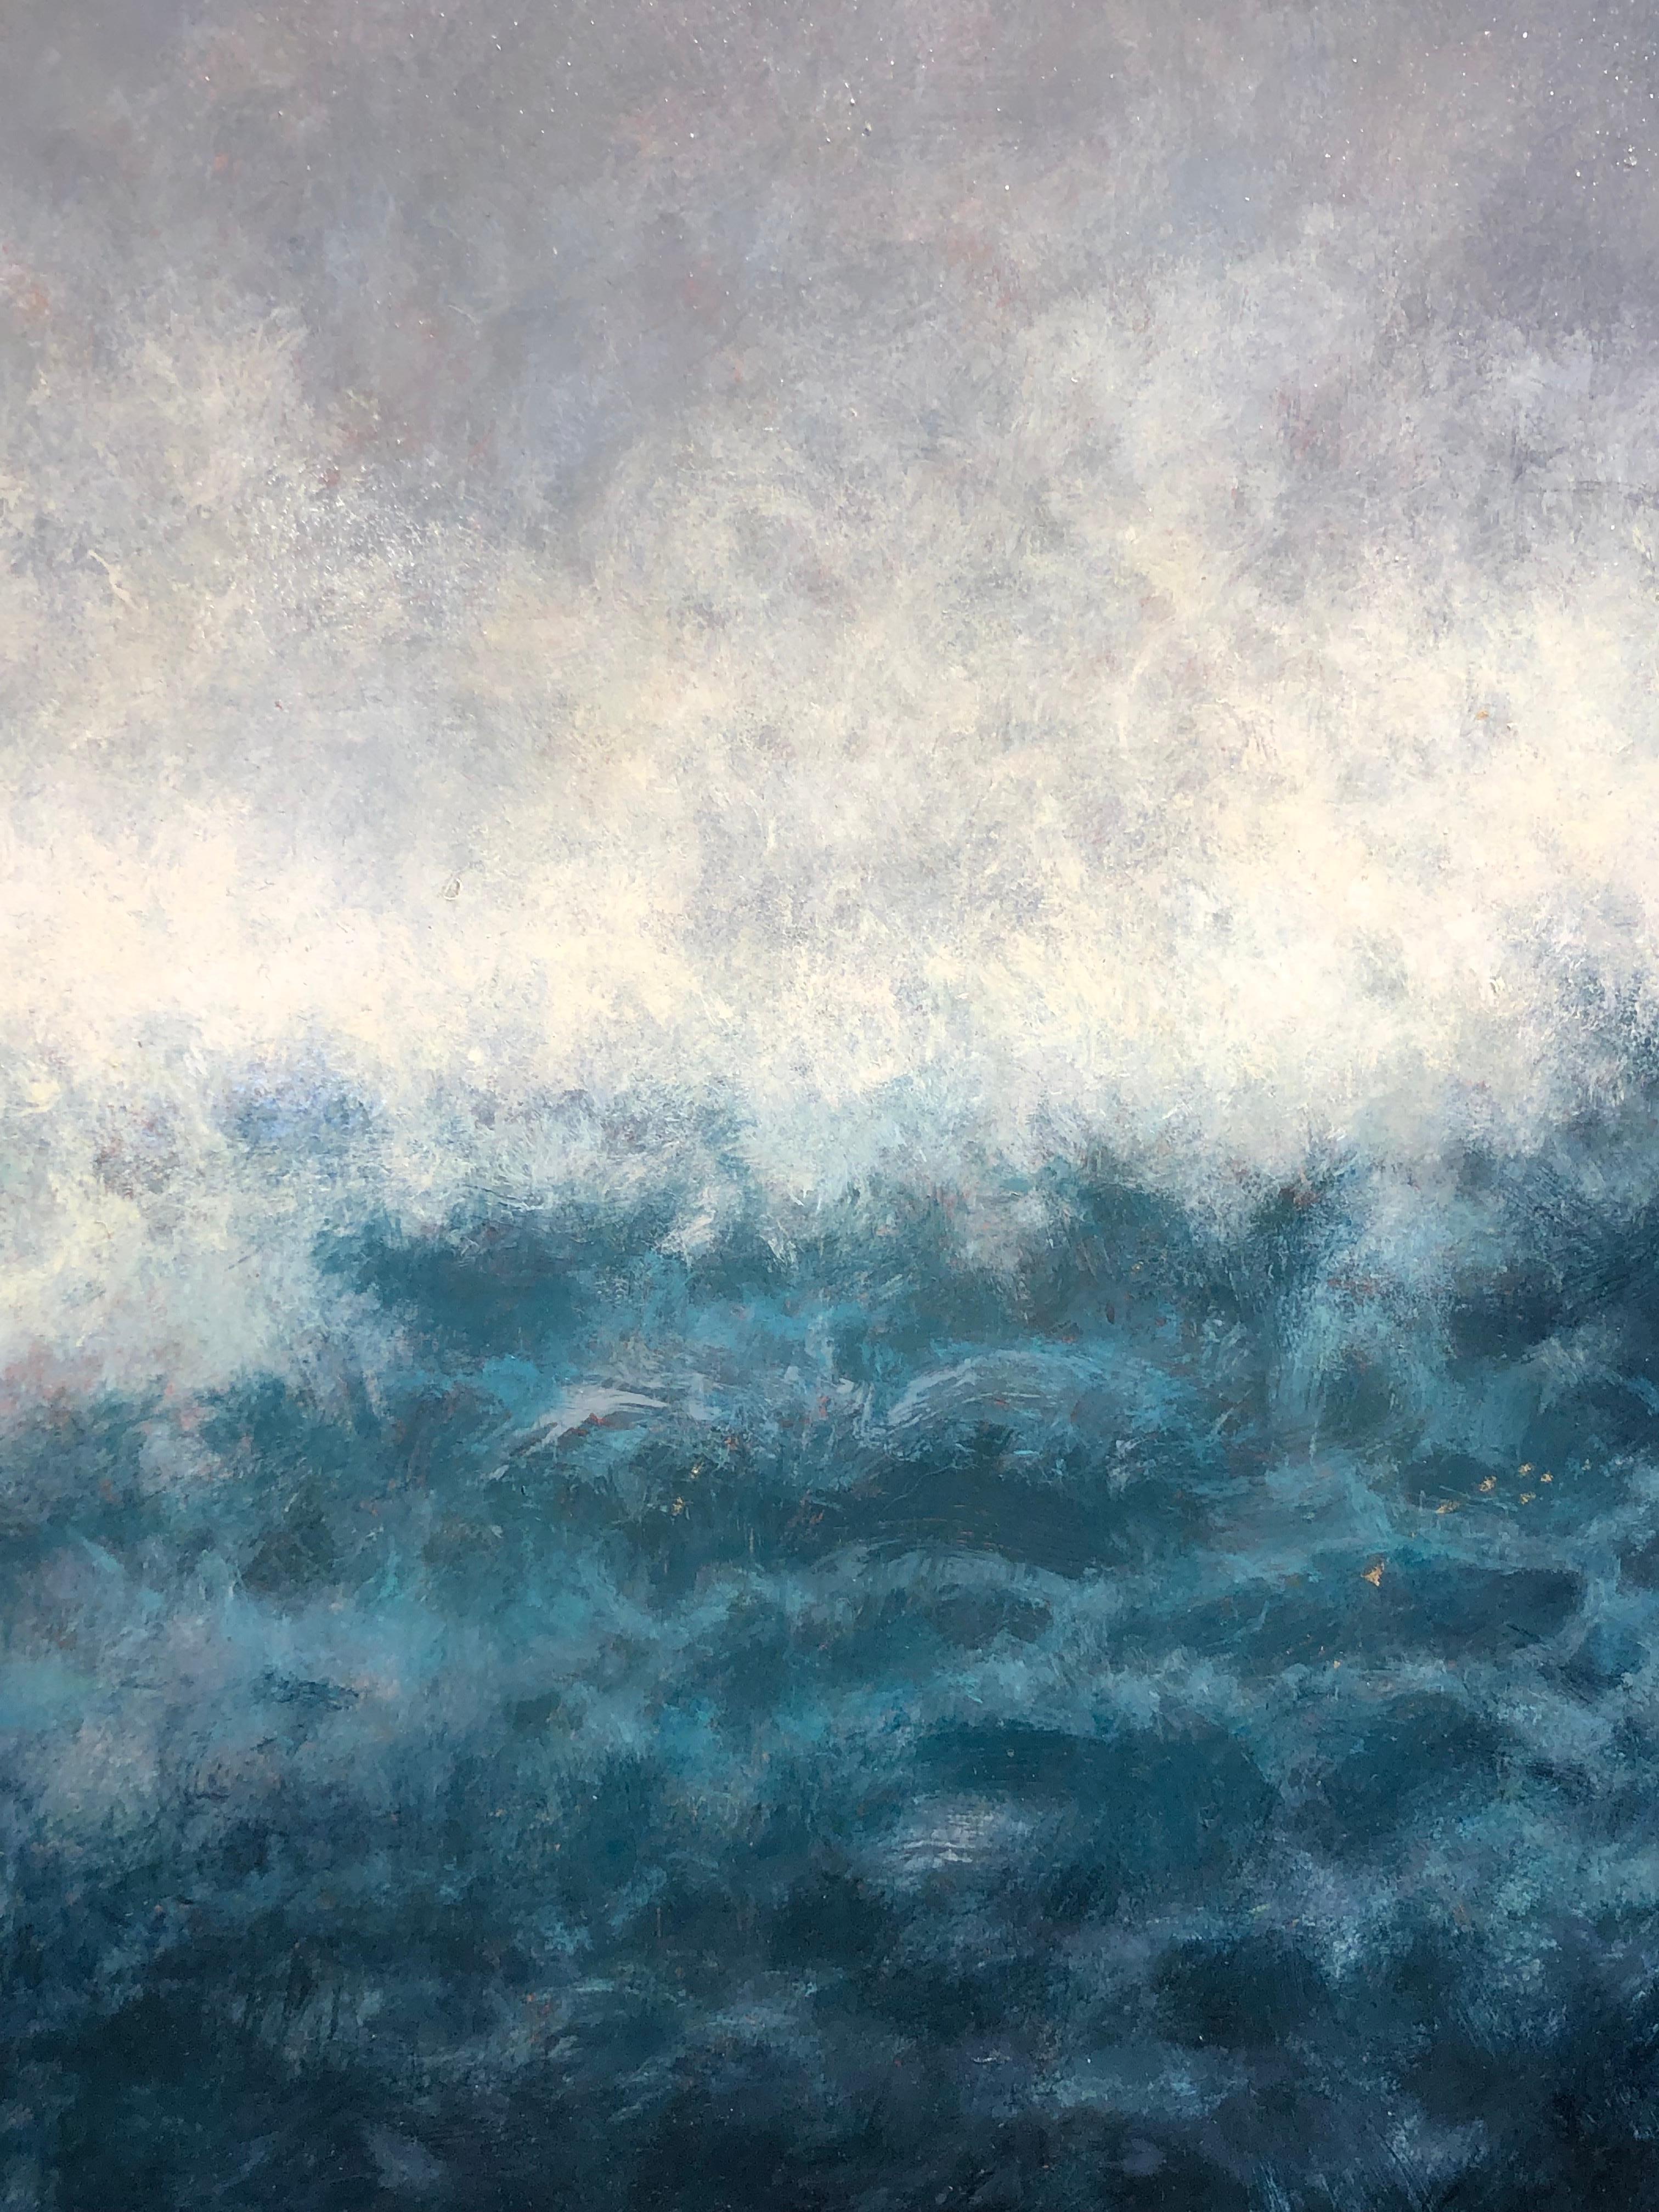 Dramatic and beautiful, this painting captures the power of the ocean in photorealist detail.  The artwork is actually loosely painted in brushy active strokes which give the effect of movement.  The blue turquoise water appears translucent and back